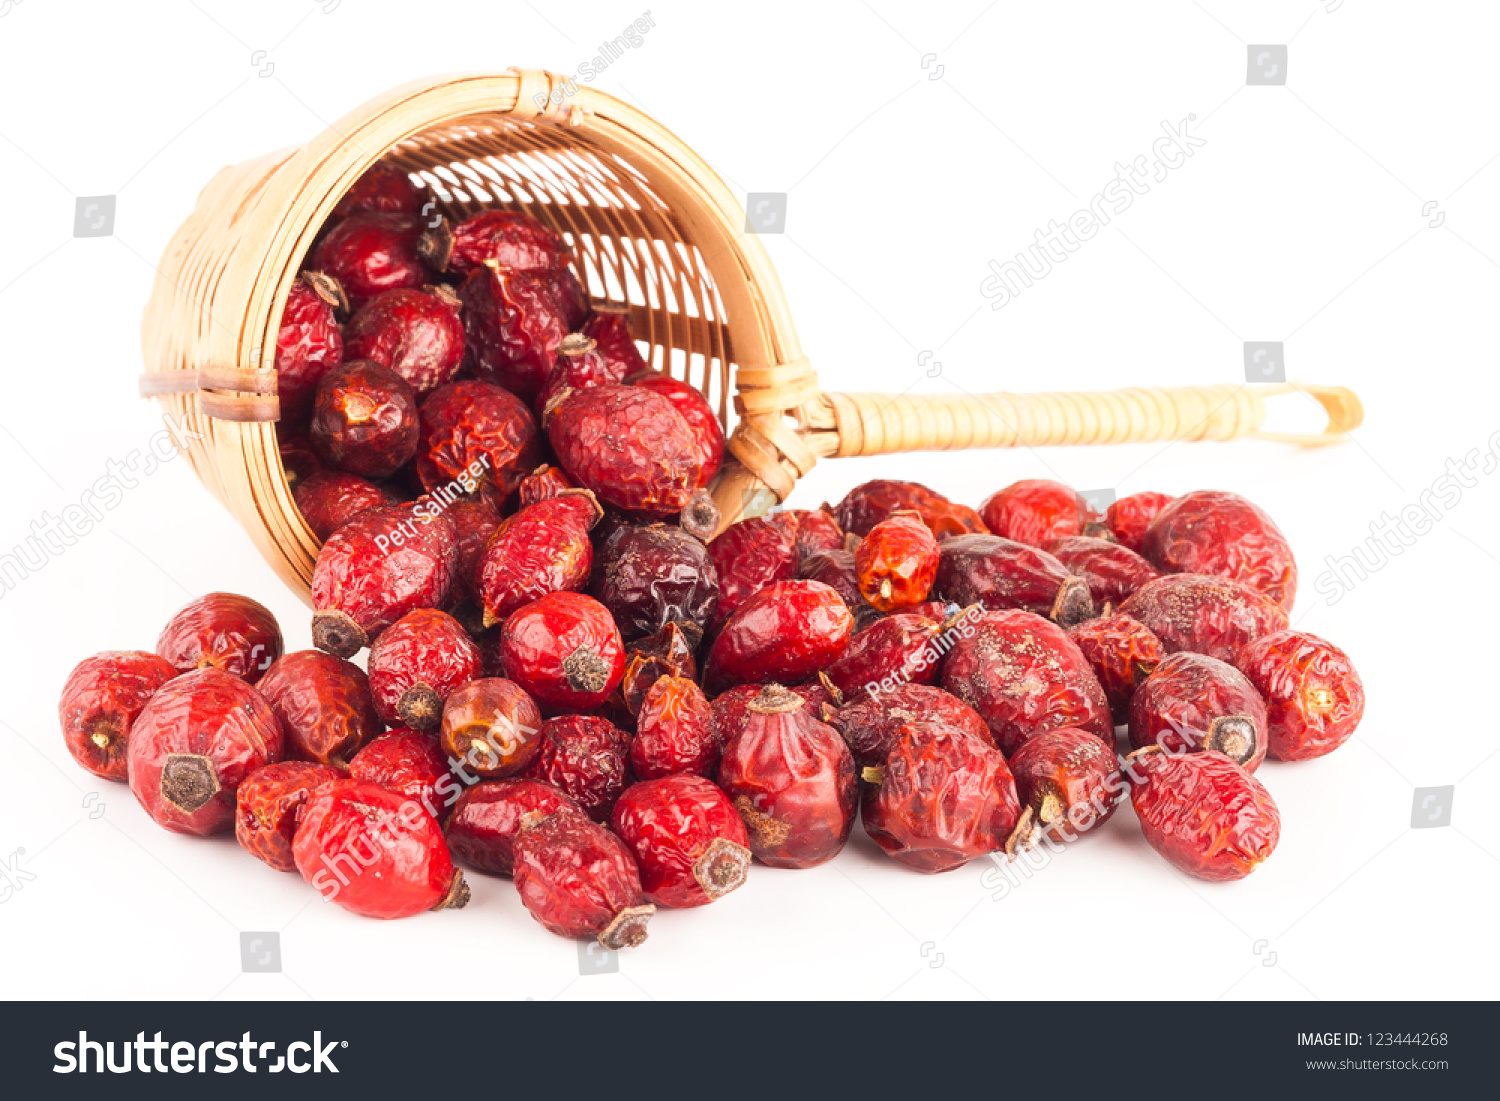 http://image.shutterstock.com/z/stock-photo-tea-strainer-with-dried-rose-hips-on-white-123444268.jpg